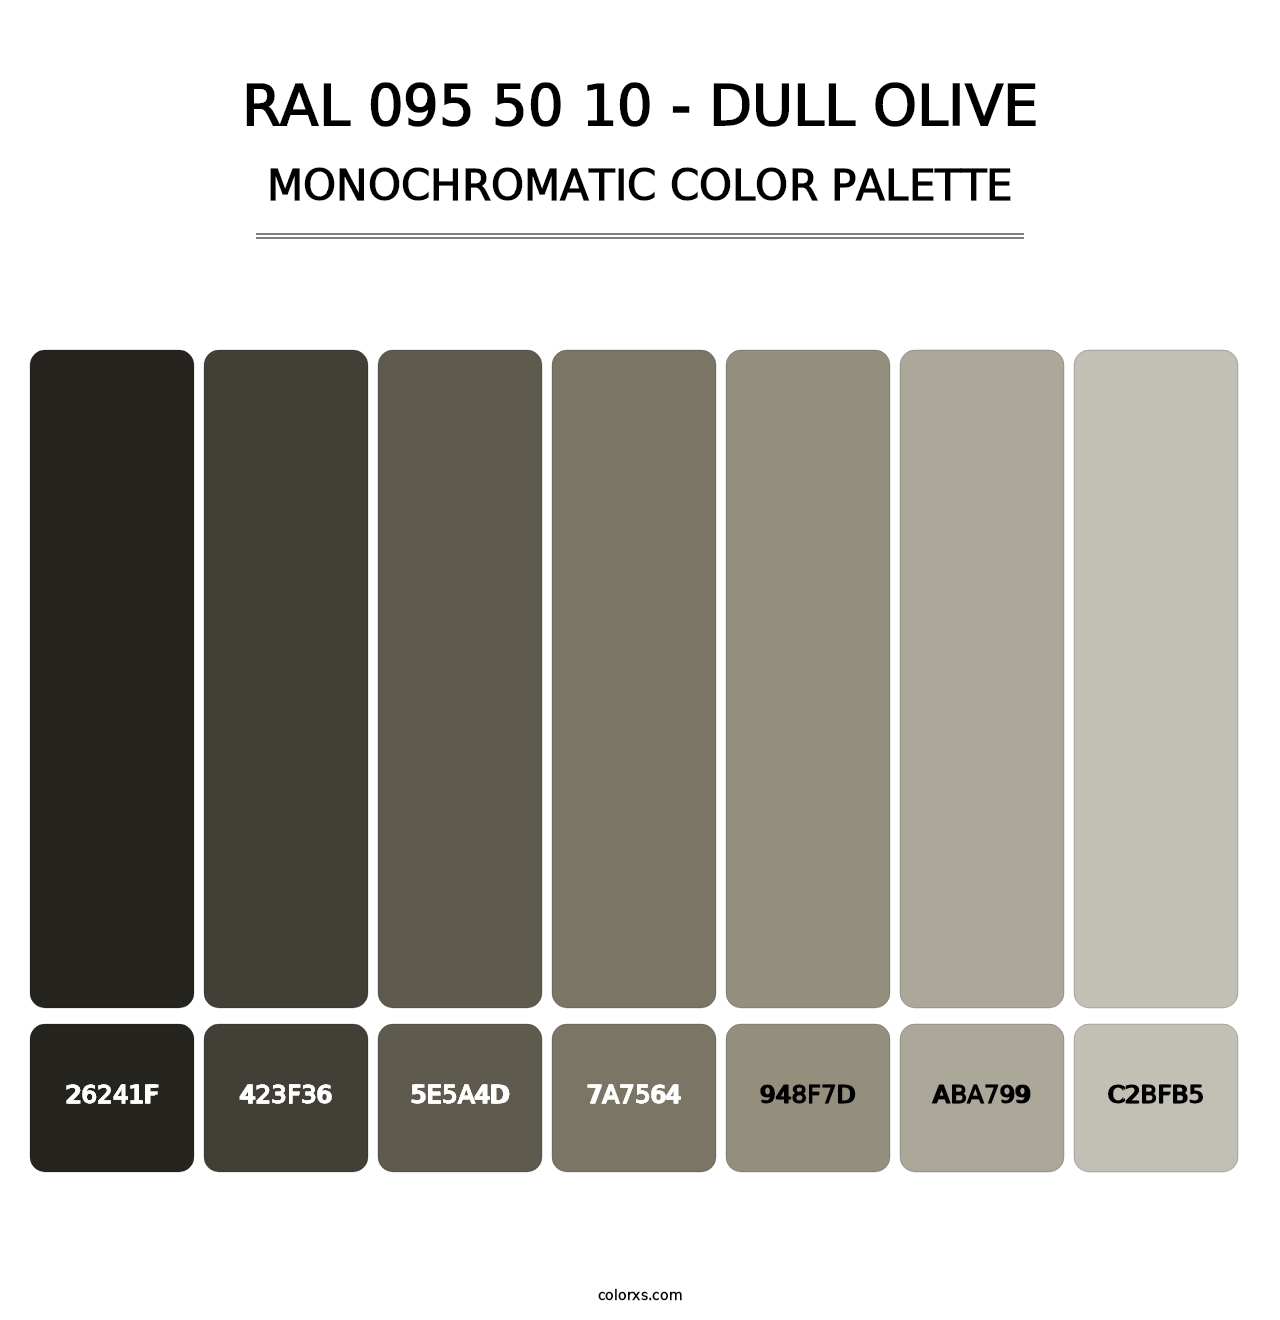 RAL 095 50 10 - Dull Olive - Monochromatic Color Palette